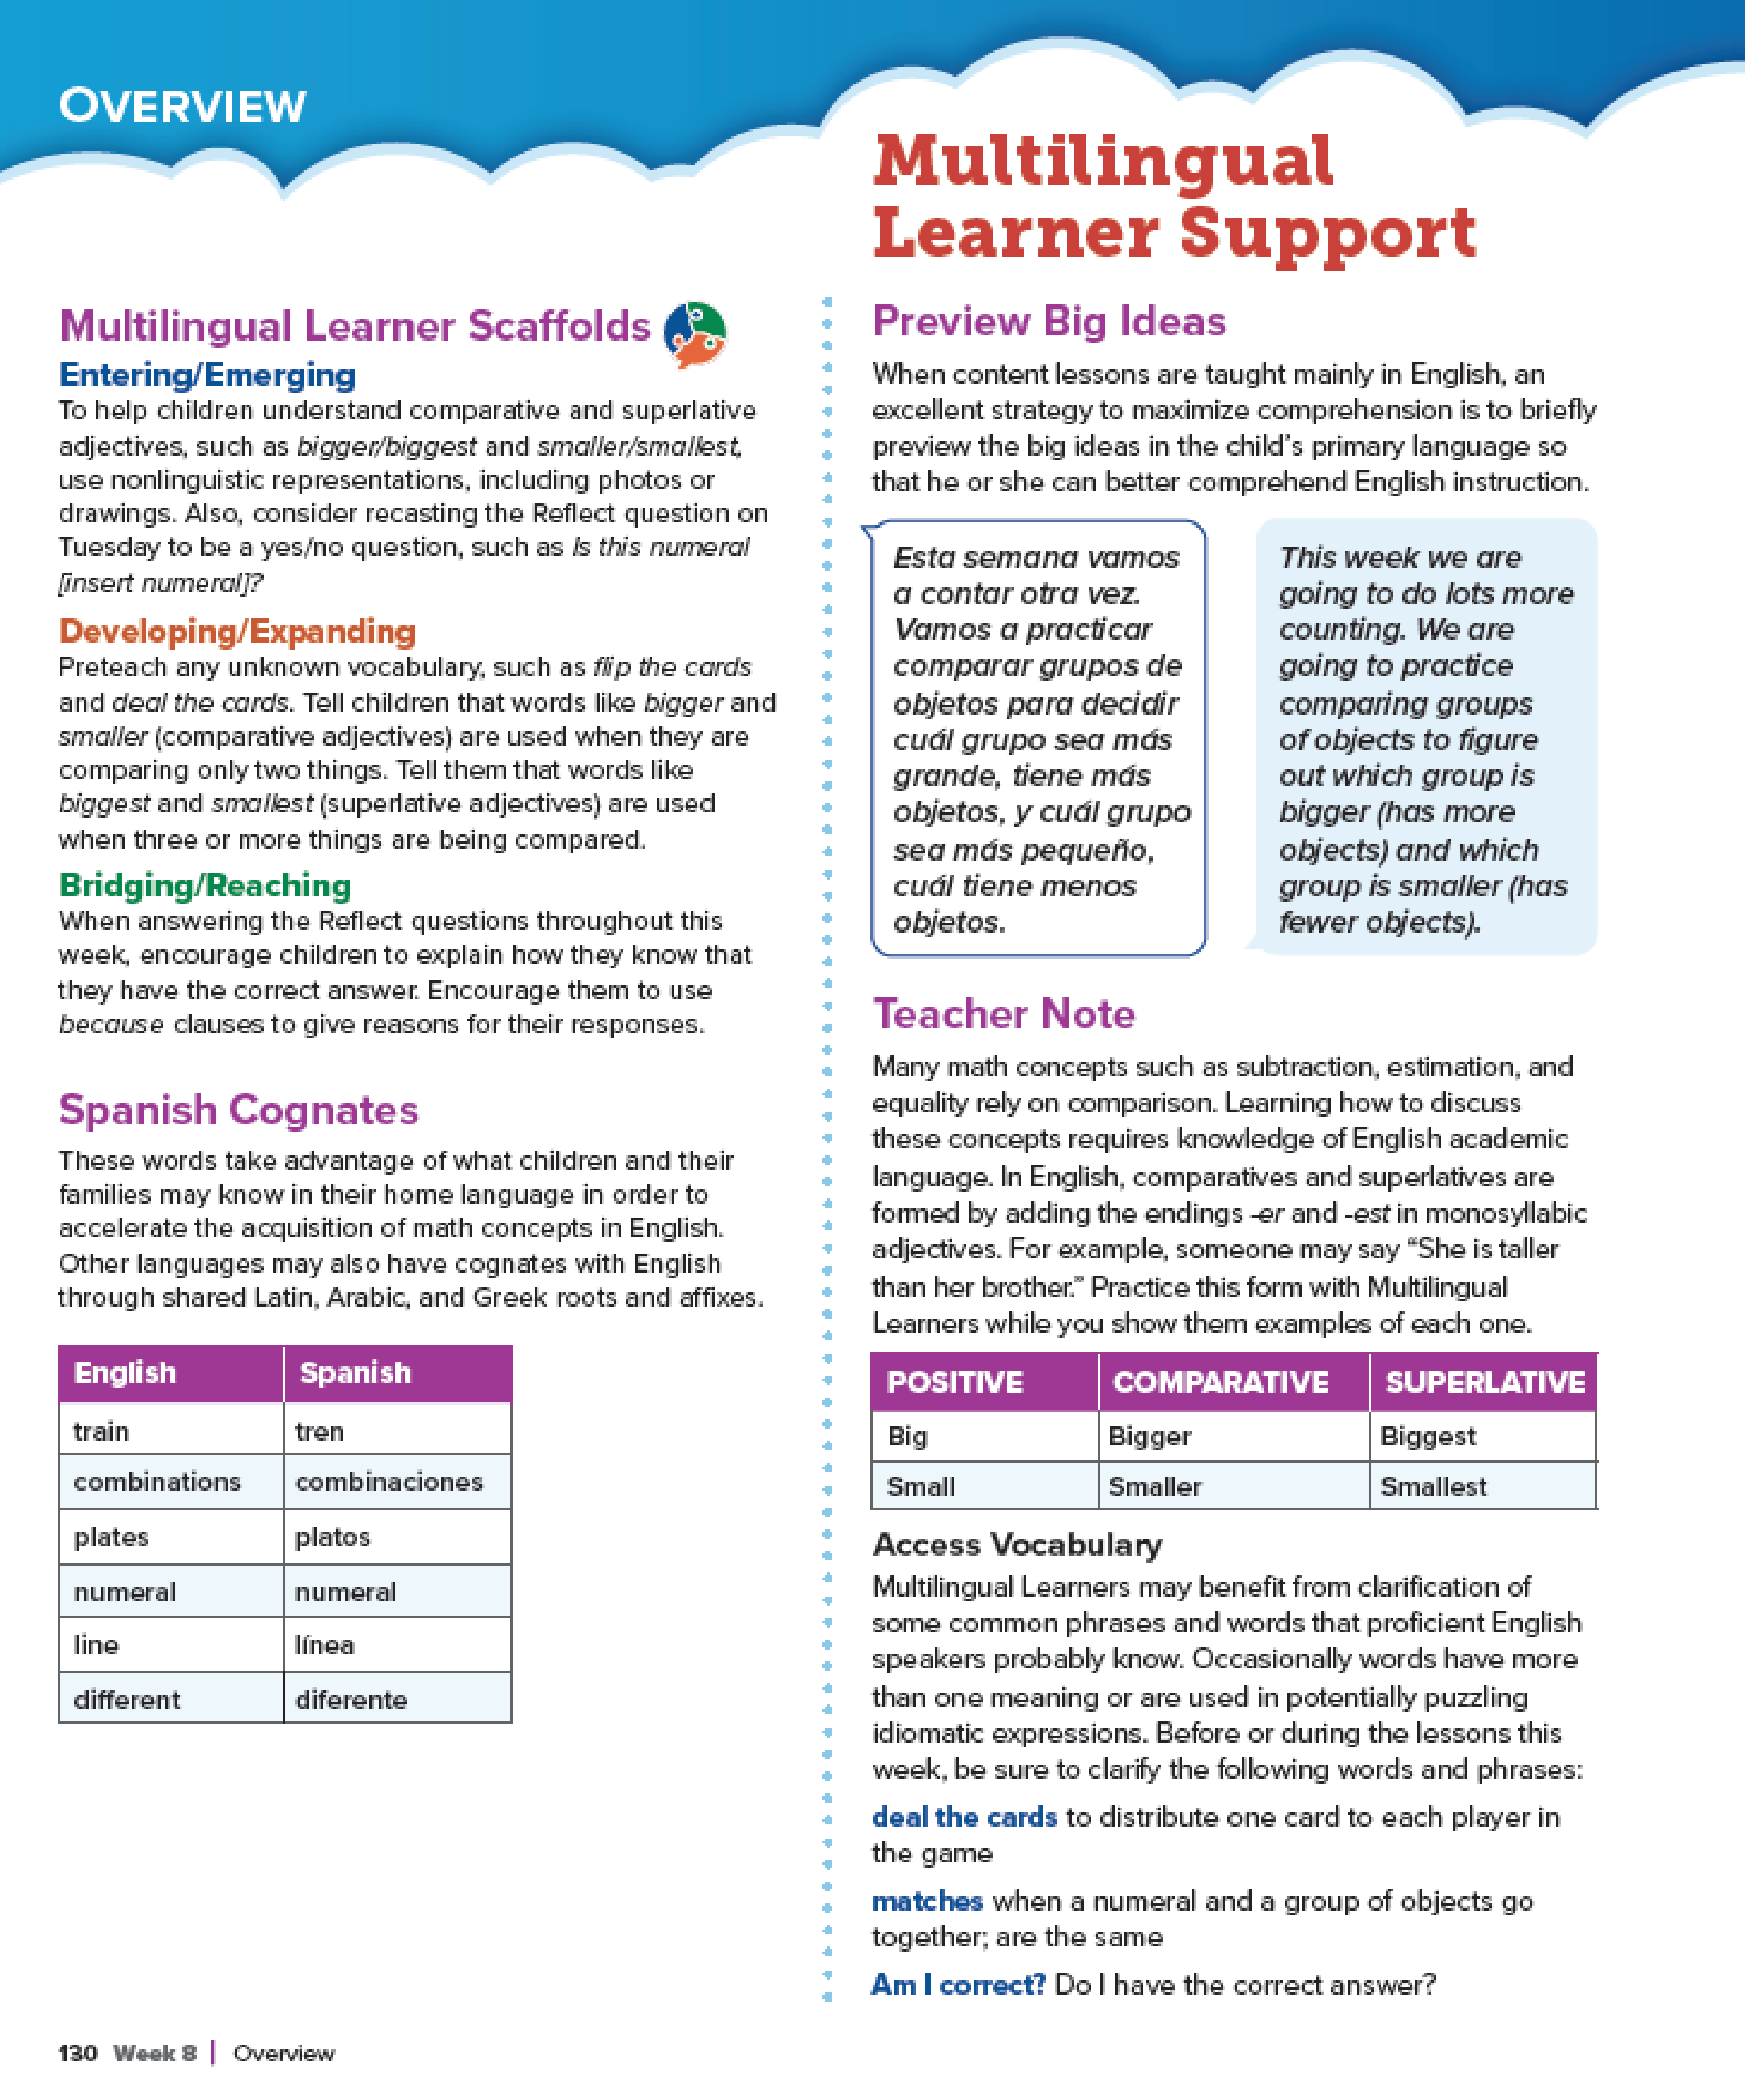 Multilingual Learner Support Overview pages showing Scaffolds, Spanish Cognates, Preview Big Ideas, and Teacher notes